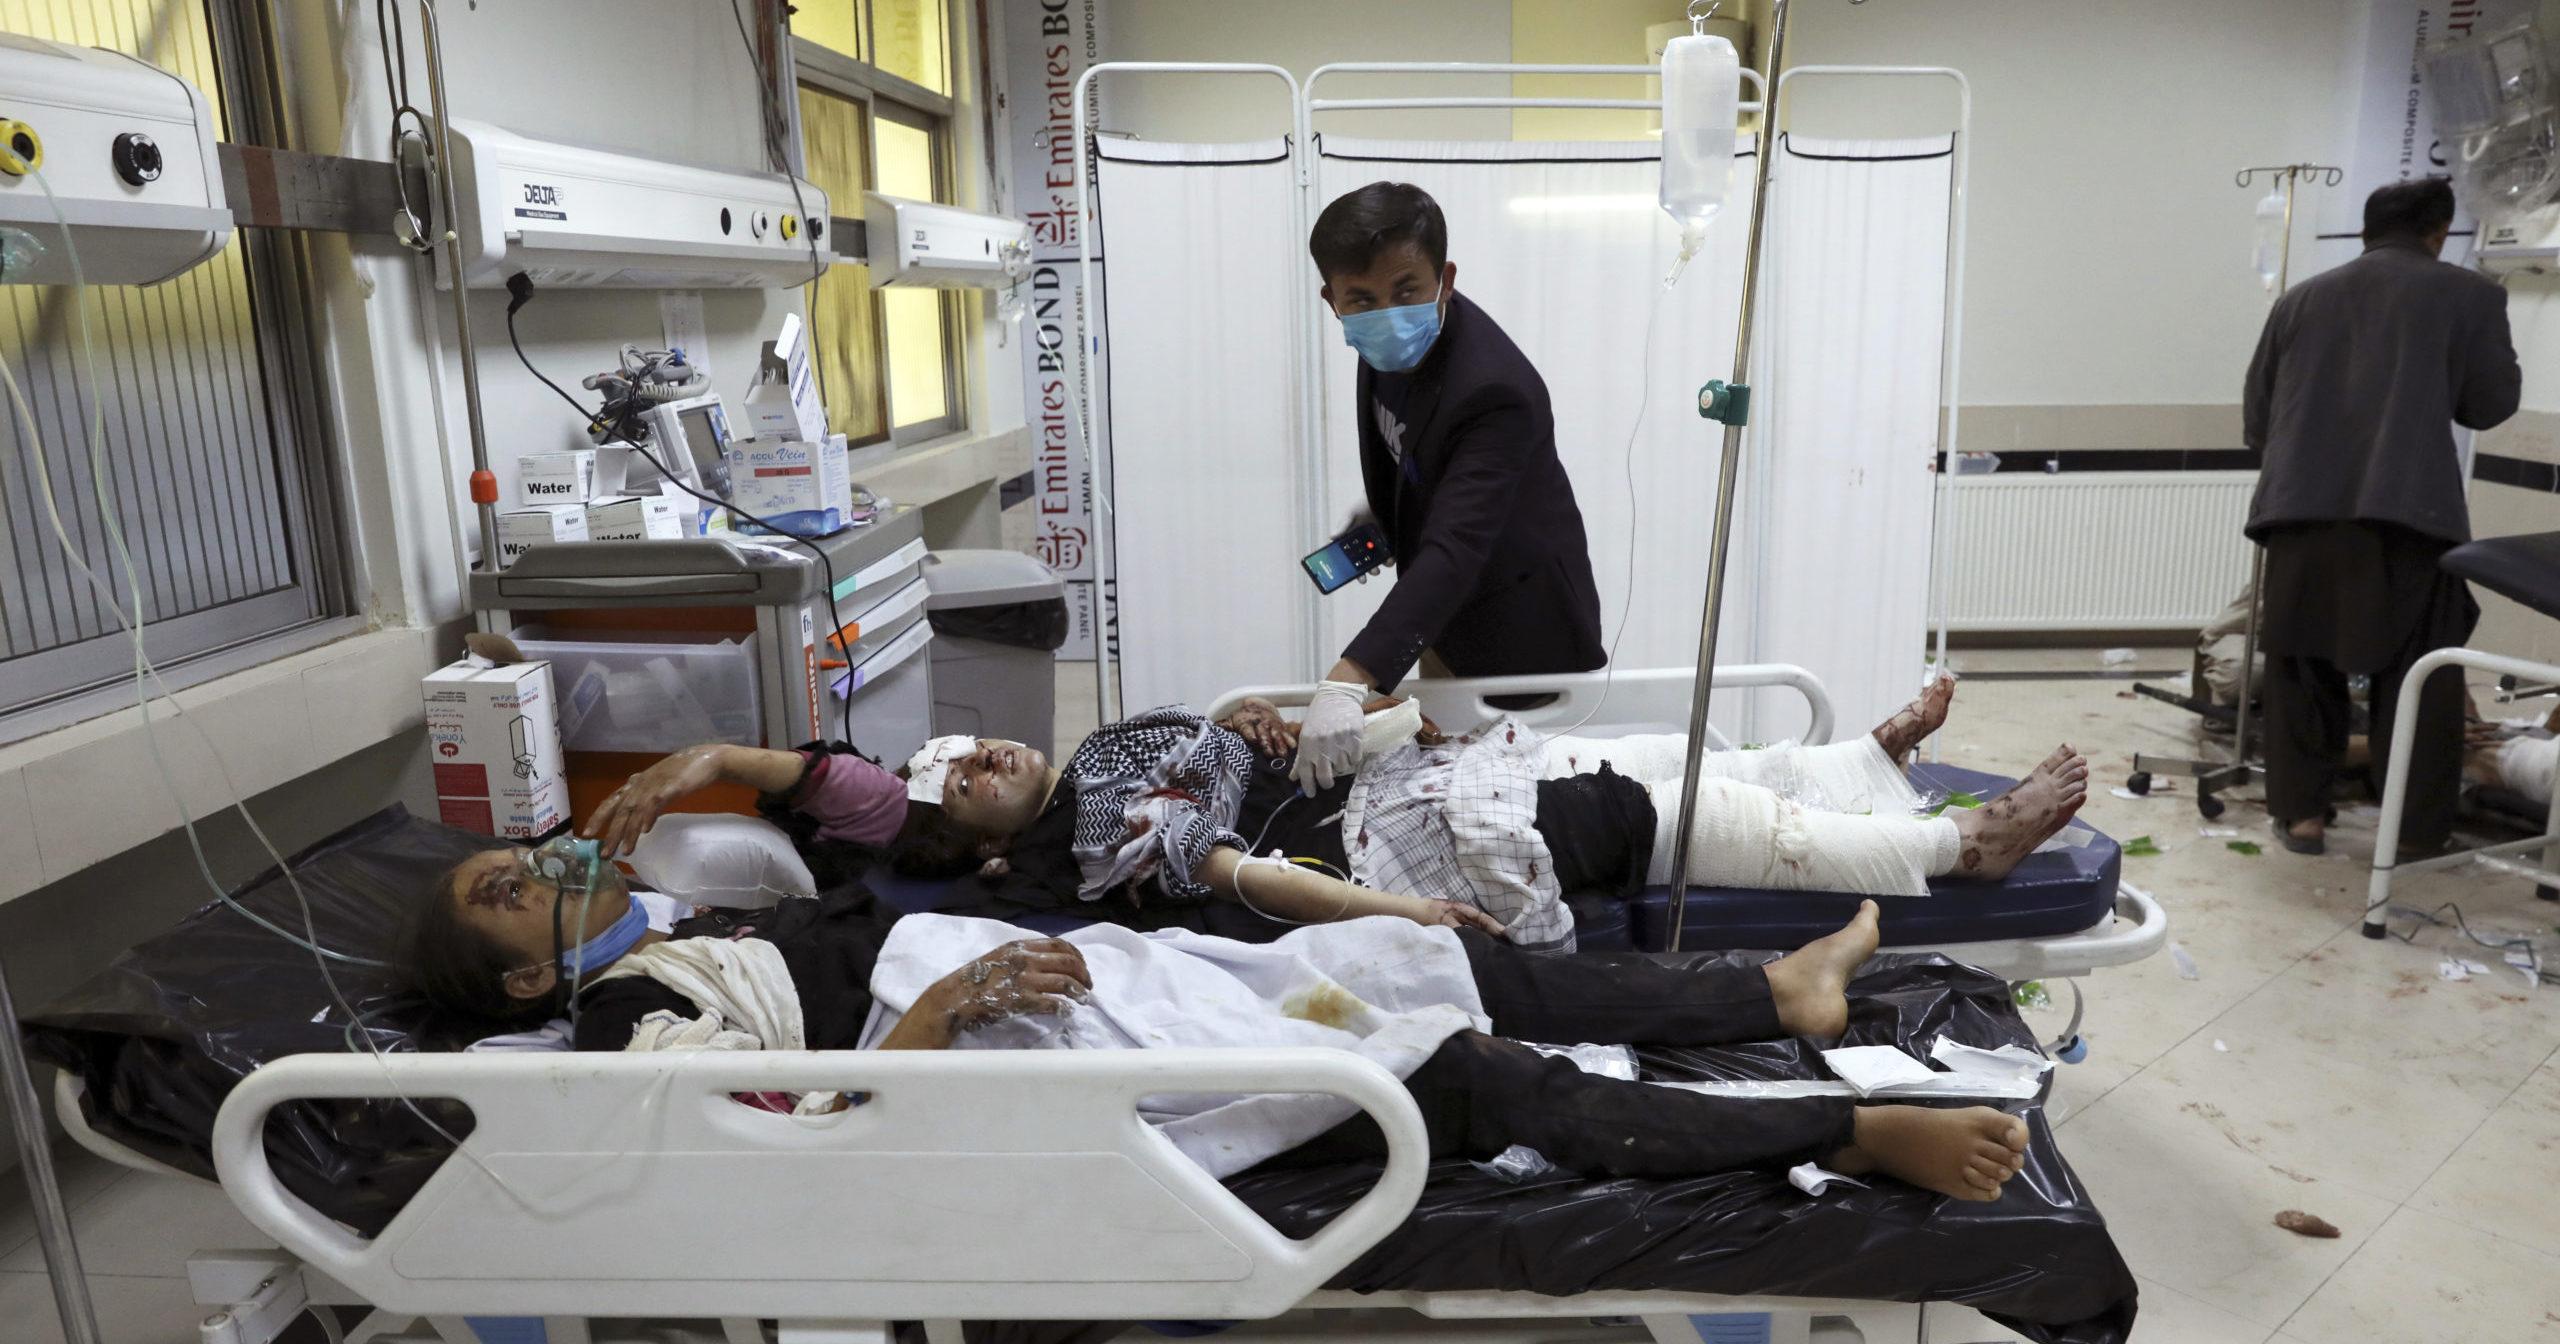 Afghan students are treated at a hospital after a bombing near a school in Kabul, Afghanistan, on Saturday